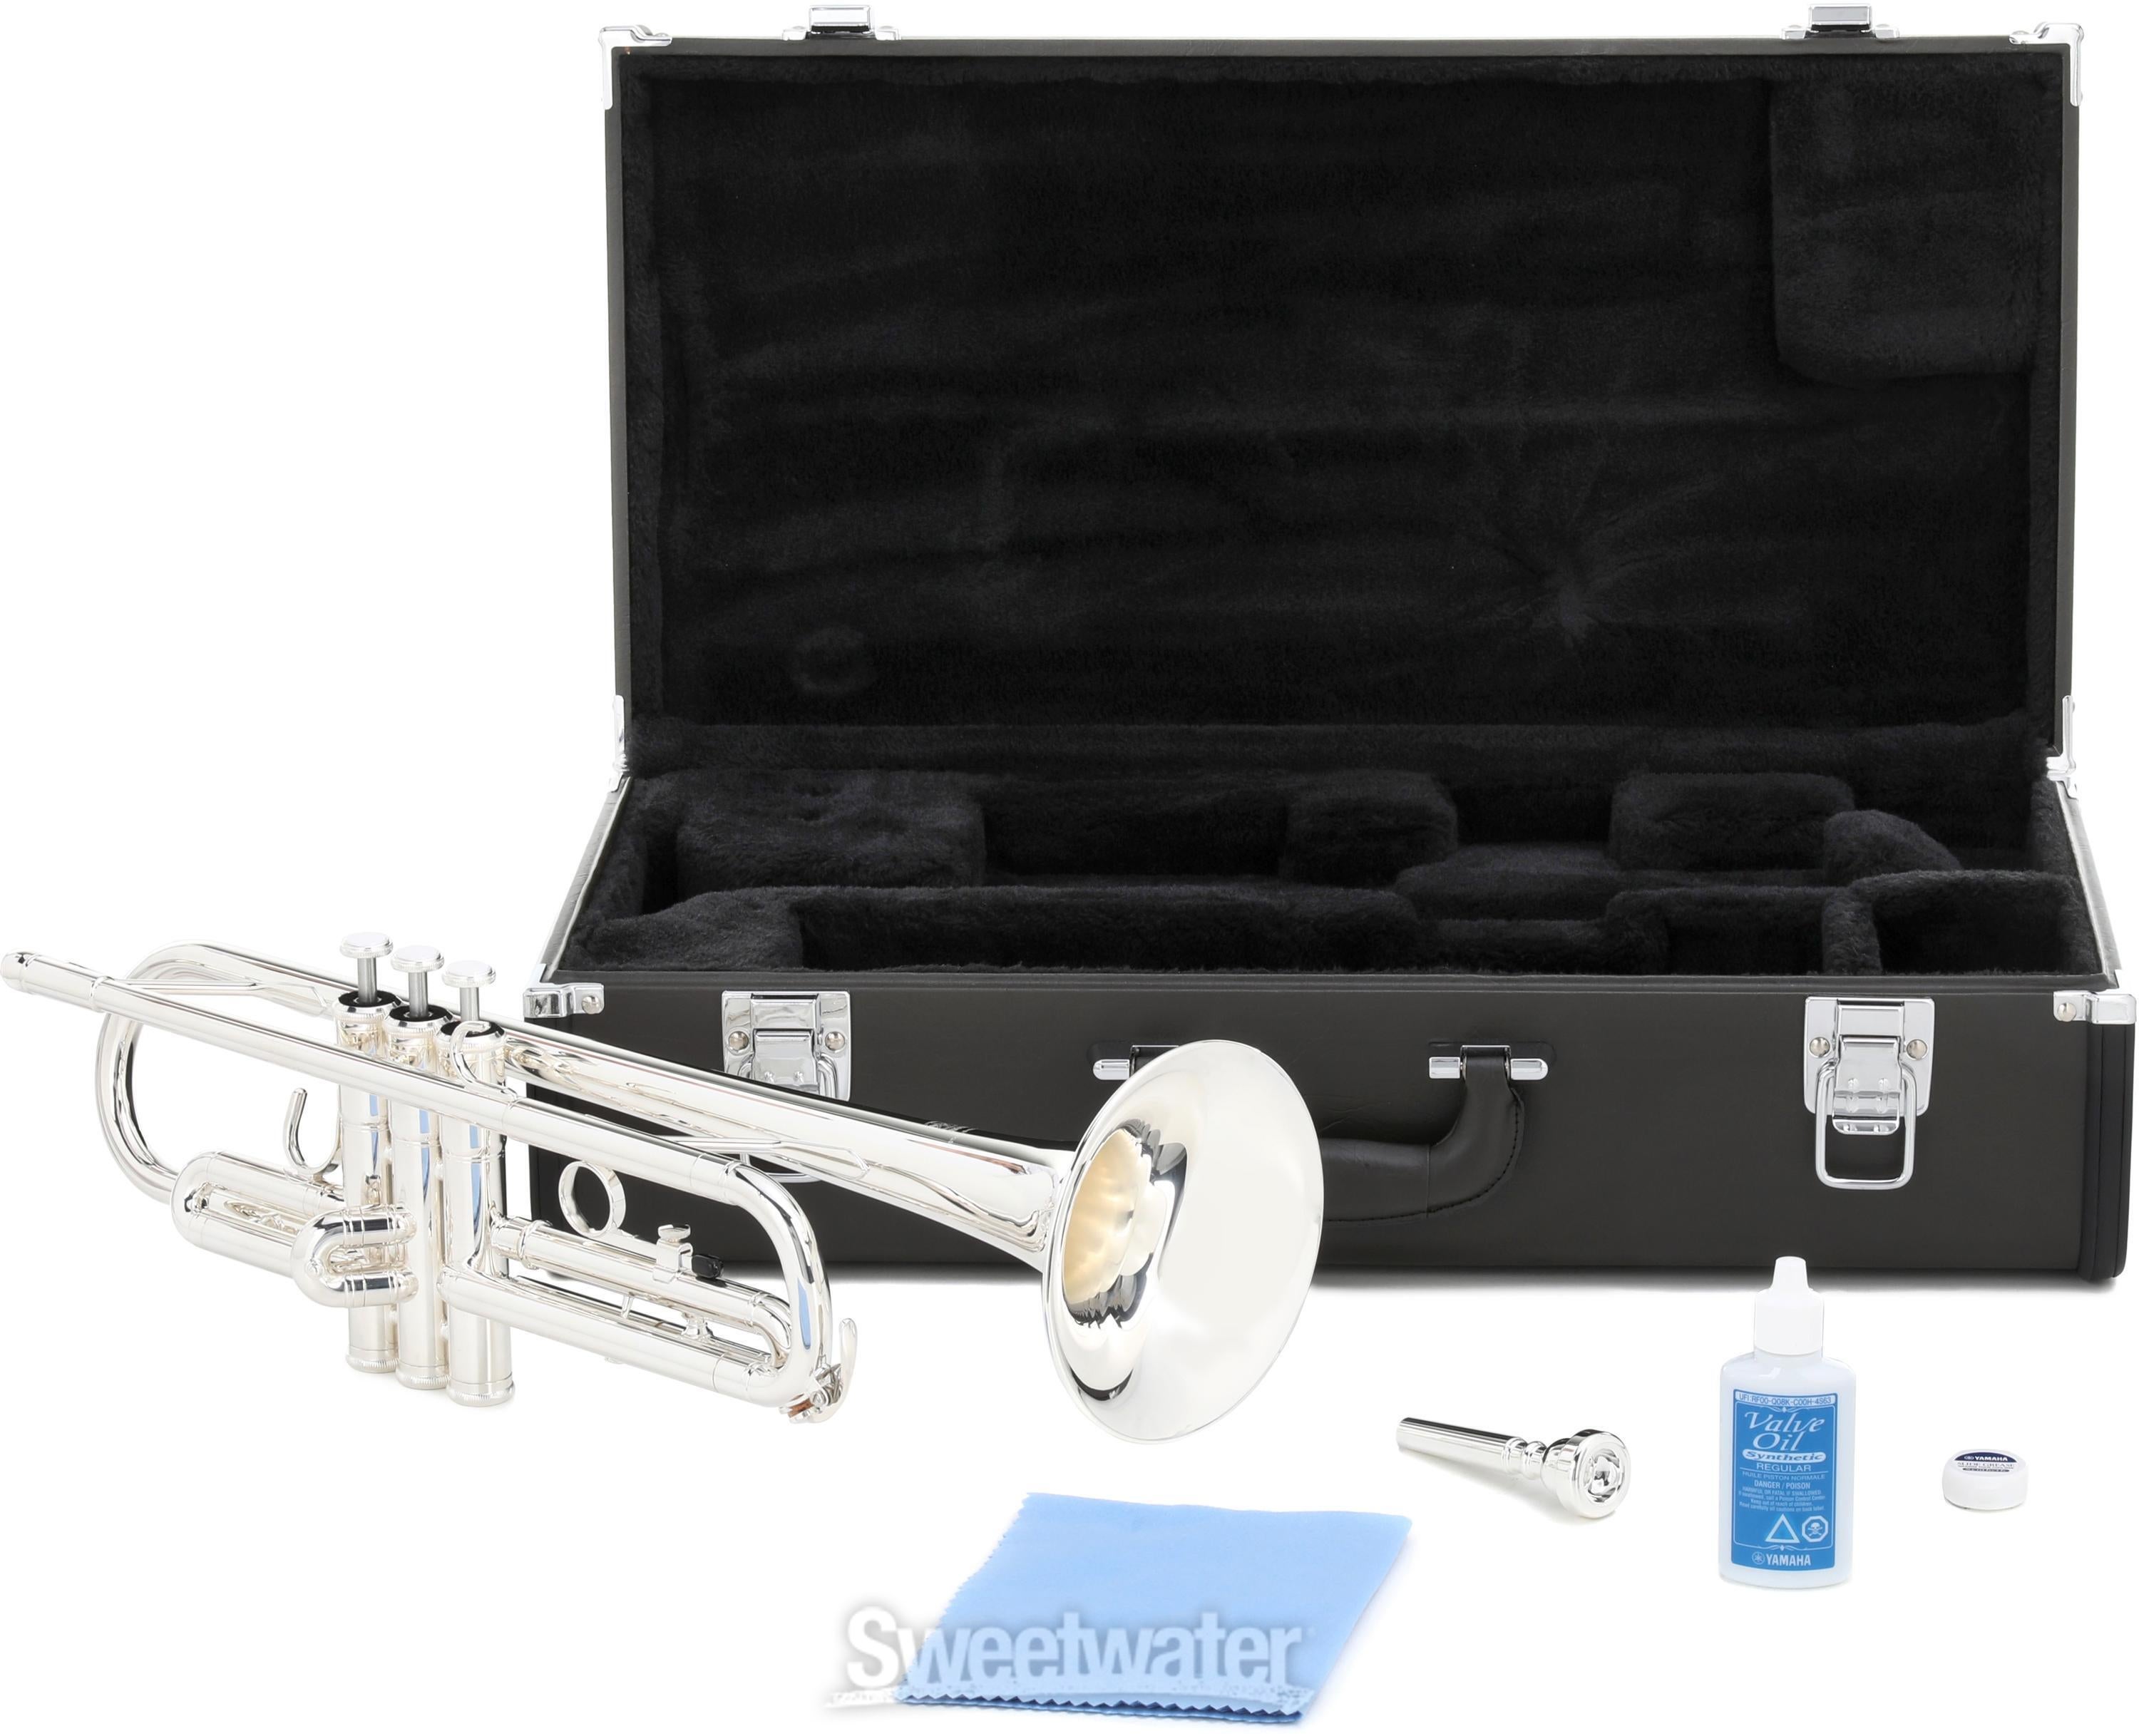 Yamaha YTR-2330 Student Bb Trumpet - Silver Plated | Sweetwater